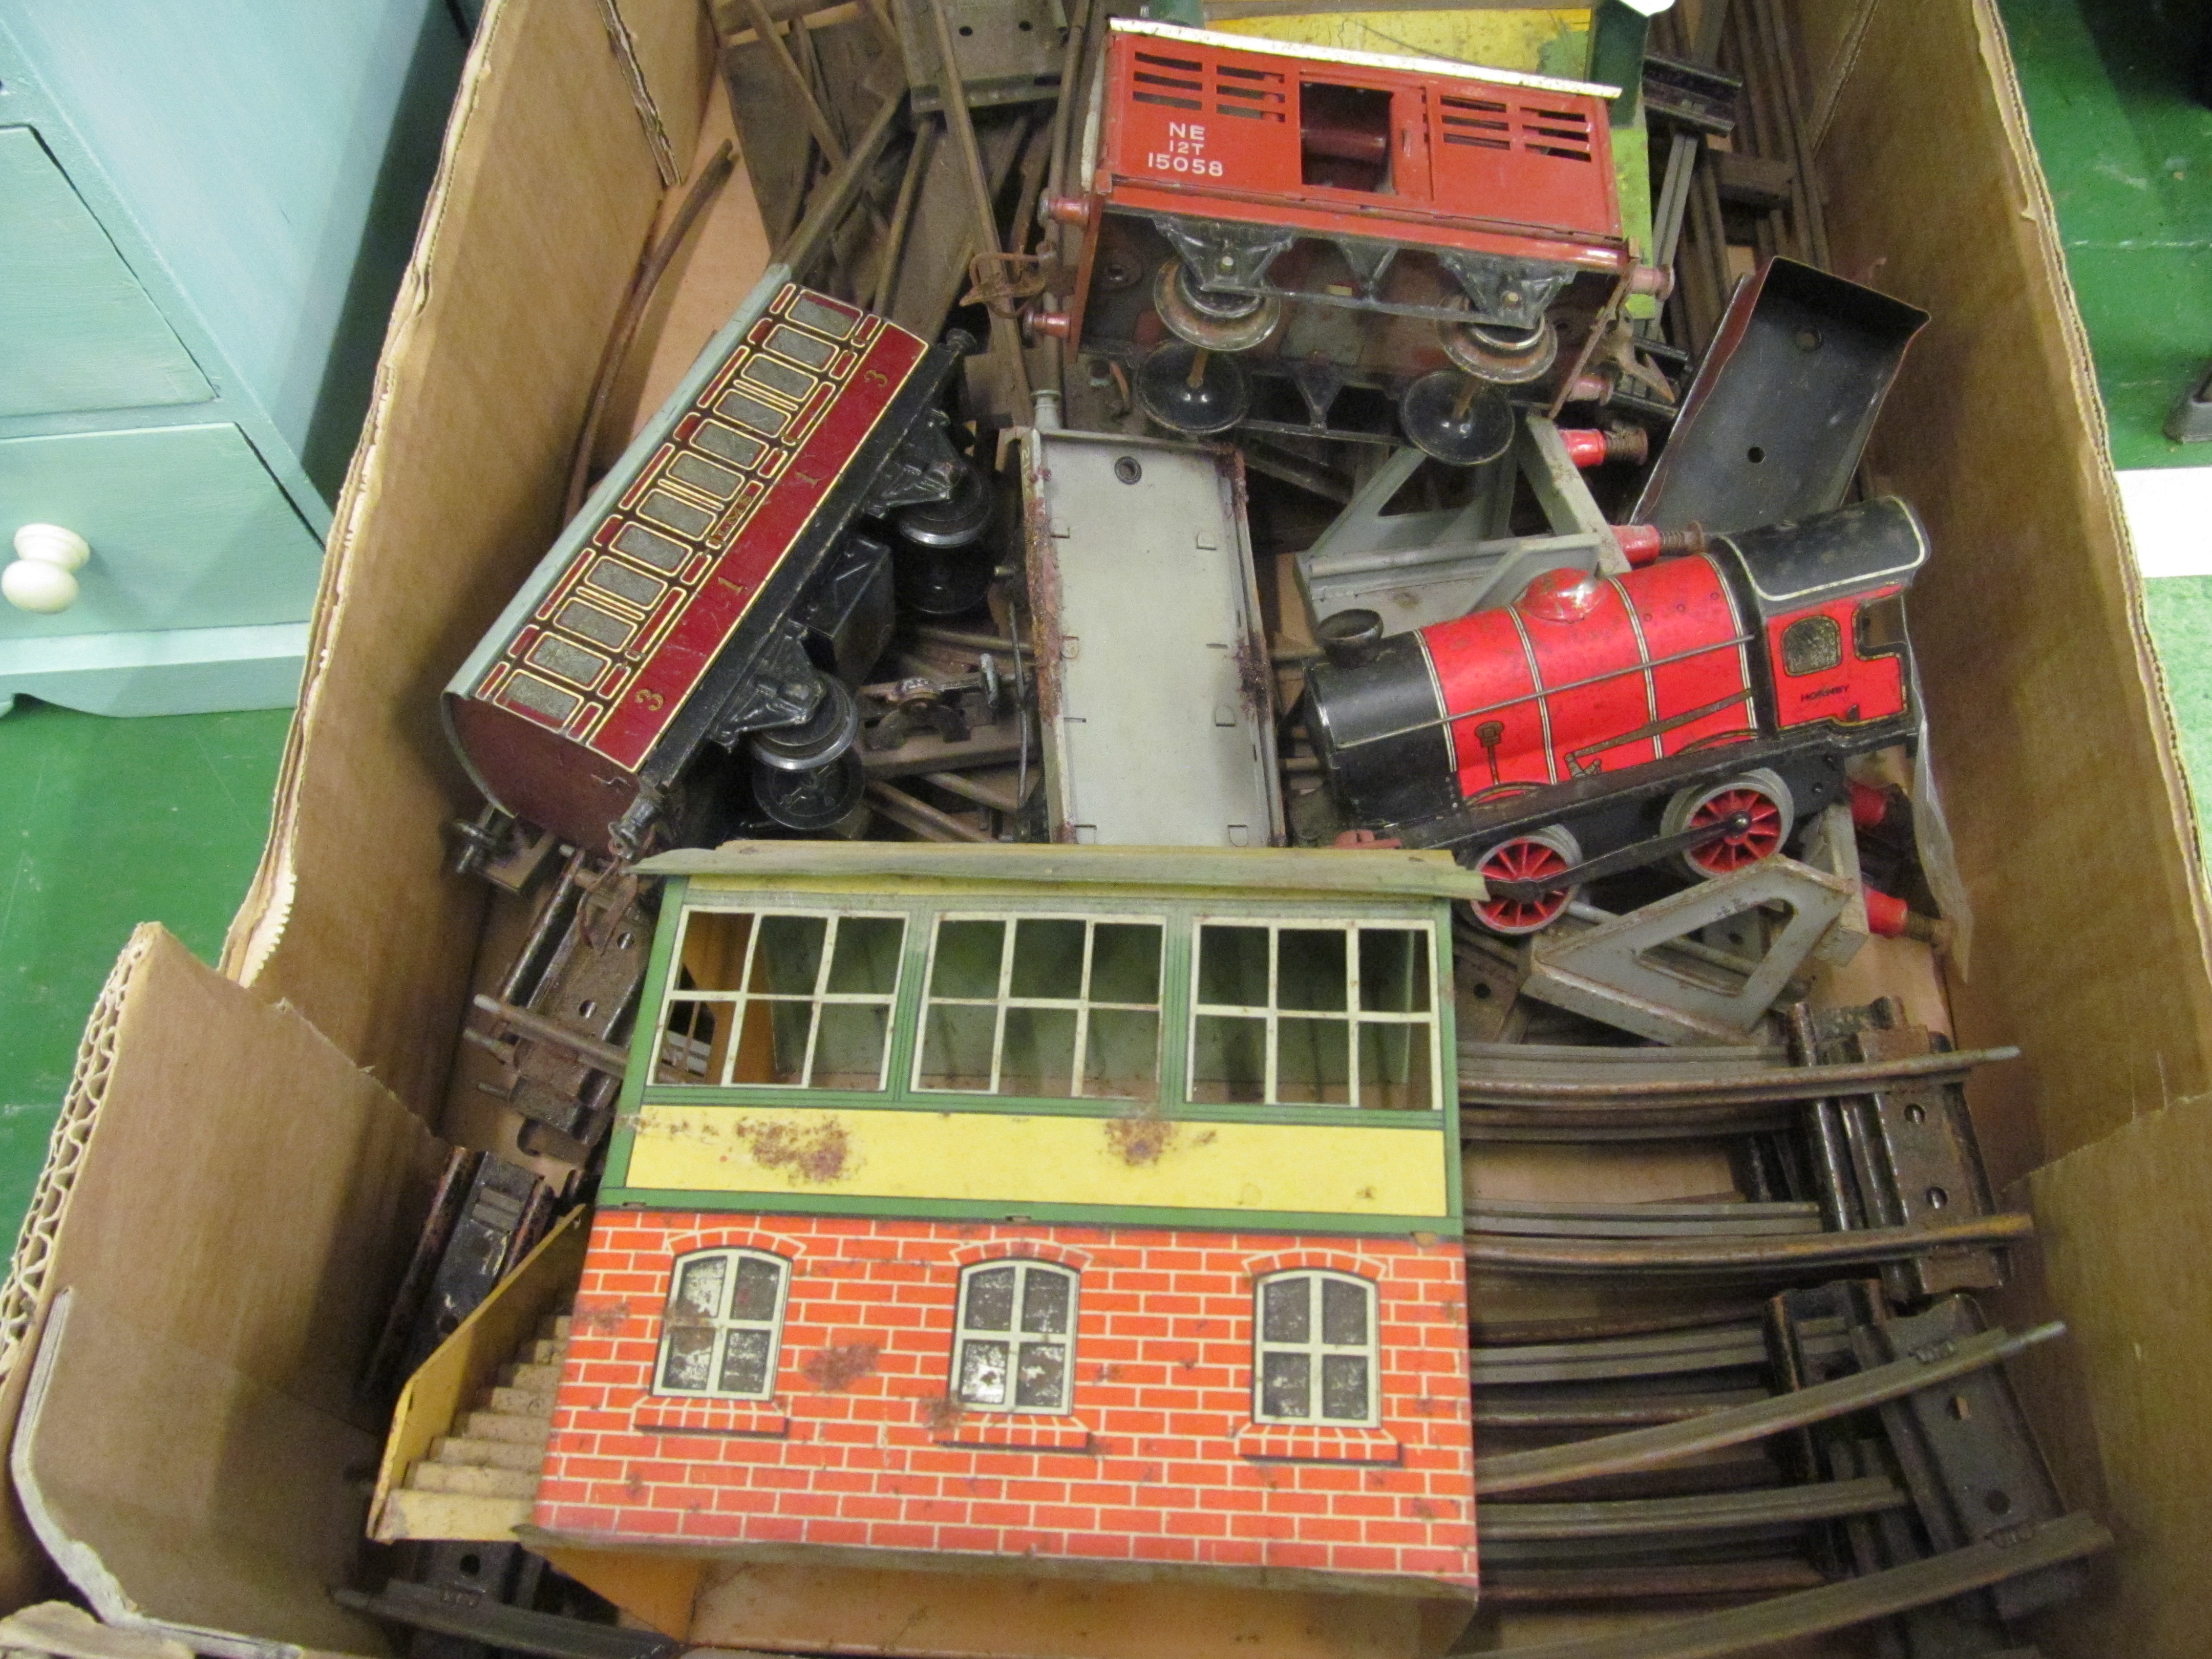 A quantity Hornby Gauge 0 tinplate trains including locomotive and tender, rolling stock, signal box - Image 2 of 2